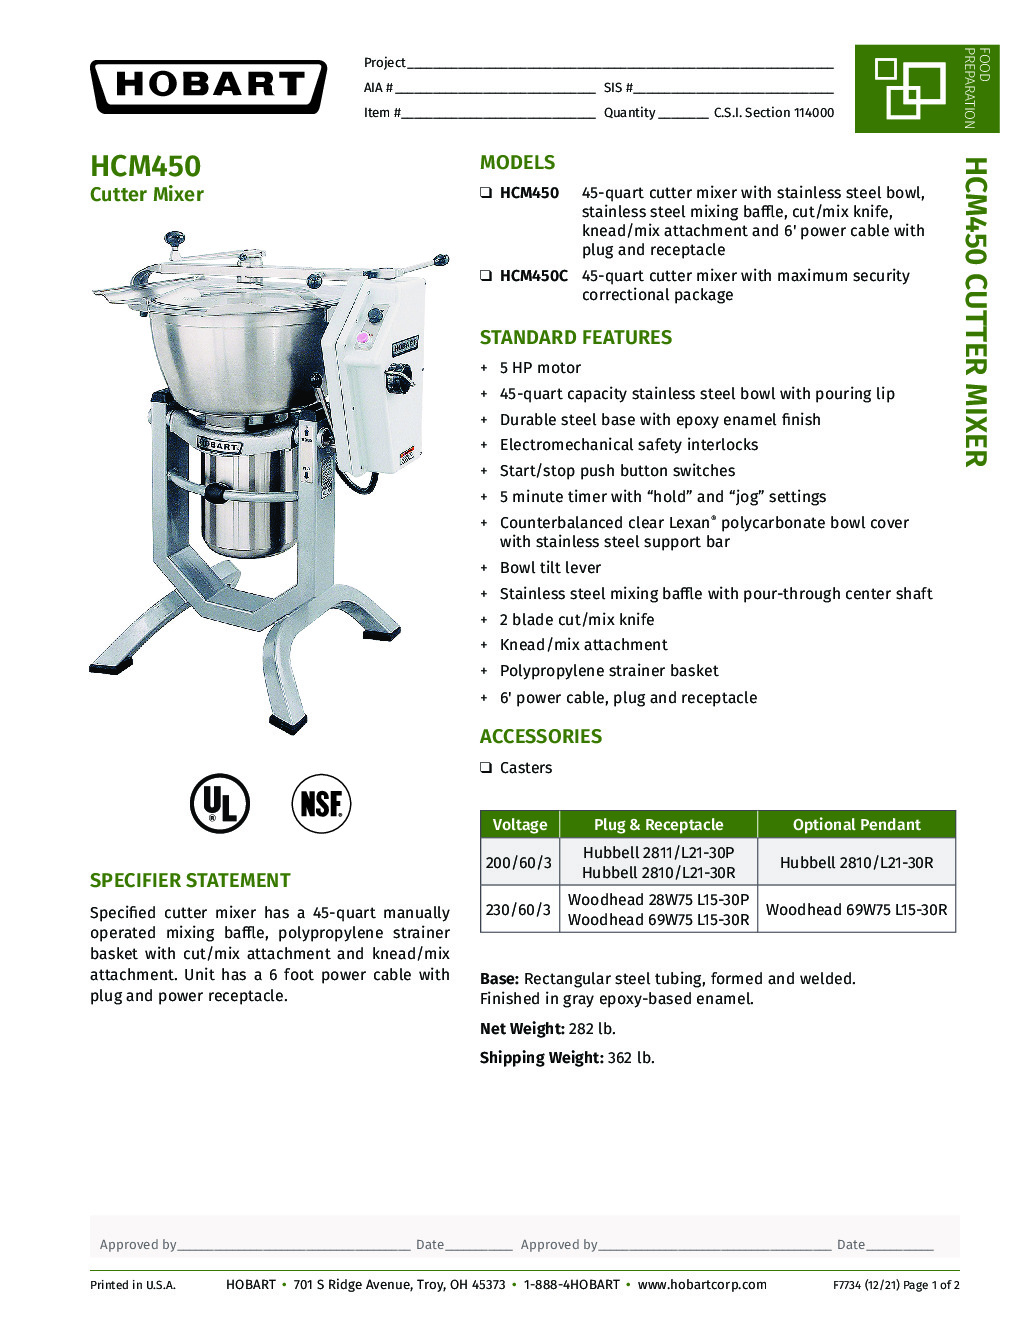 Hobart HCM450C-61 Correctional Vertical Cutter Mixer with 45 qt Capacity, Tilting Bowl, Cut-Mix and Knead-Mix Attachment, 5 hp, 200/60/3